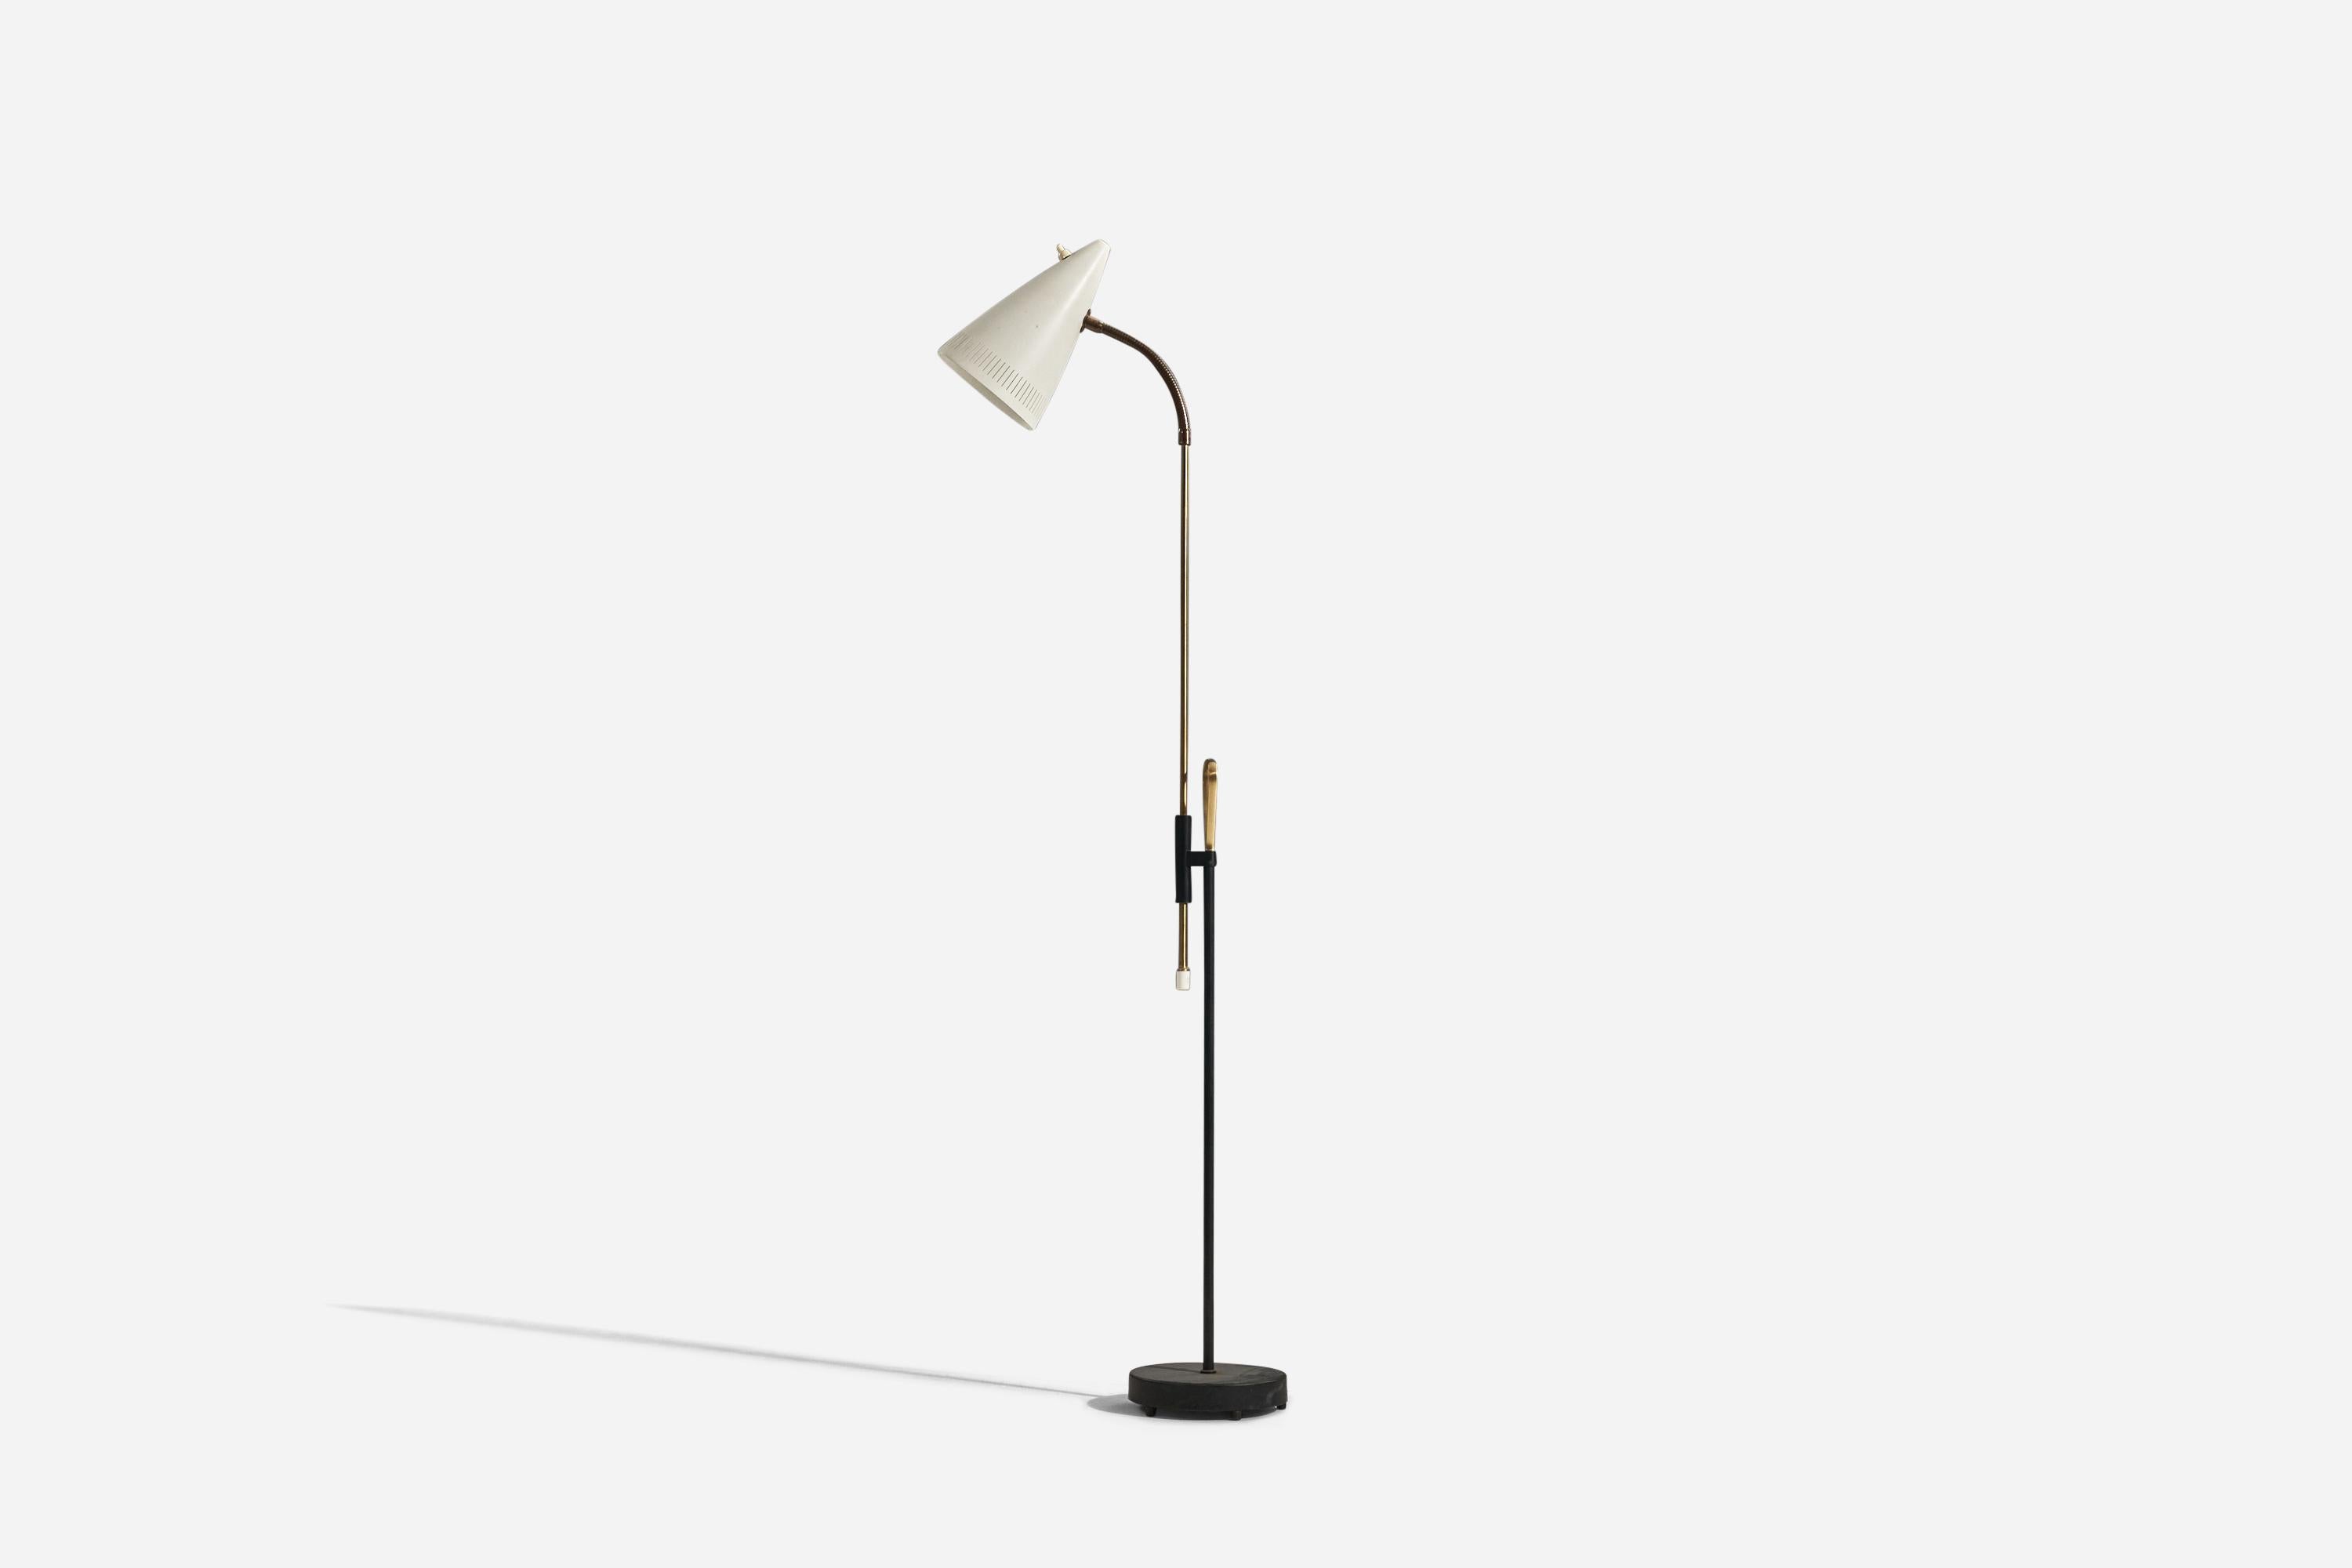 A brass, white-lacquered metal floor lamp designed and produced by Ewå Värnamo, Sweden, 1950s. 

Variable dimensions, measured as illustrated in the first image.

Socket takes standard E-26 medium base bulb.
There is no maximum wattage stated on the